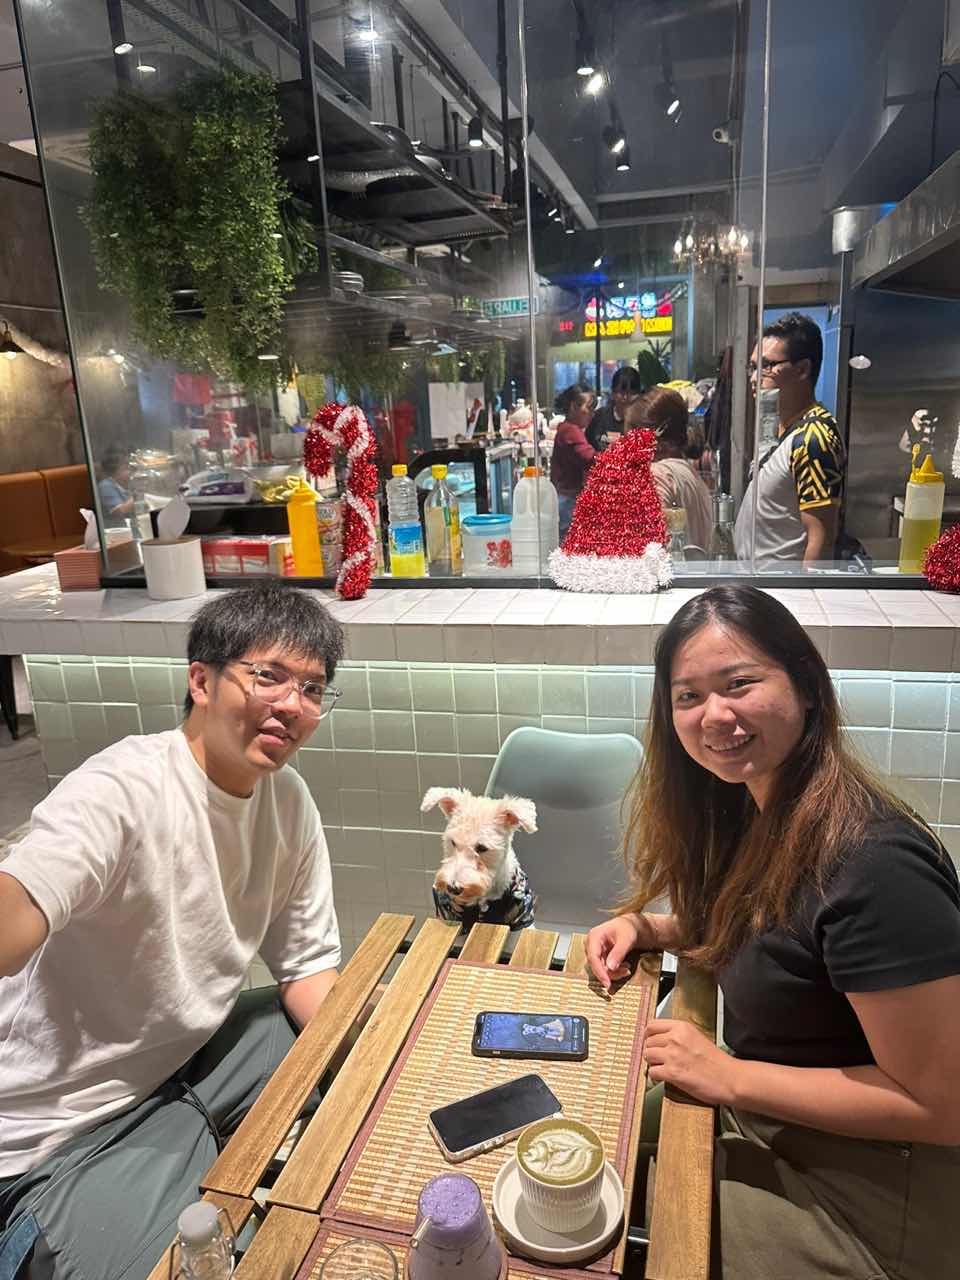 Couples with their dog having coffee at a cafe